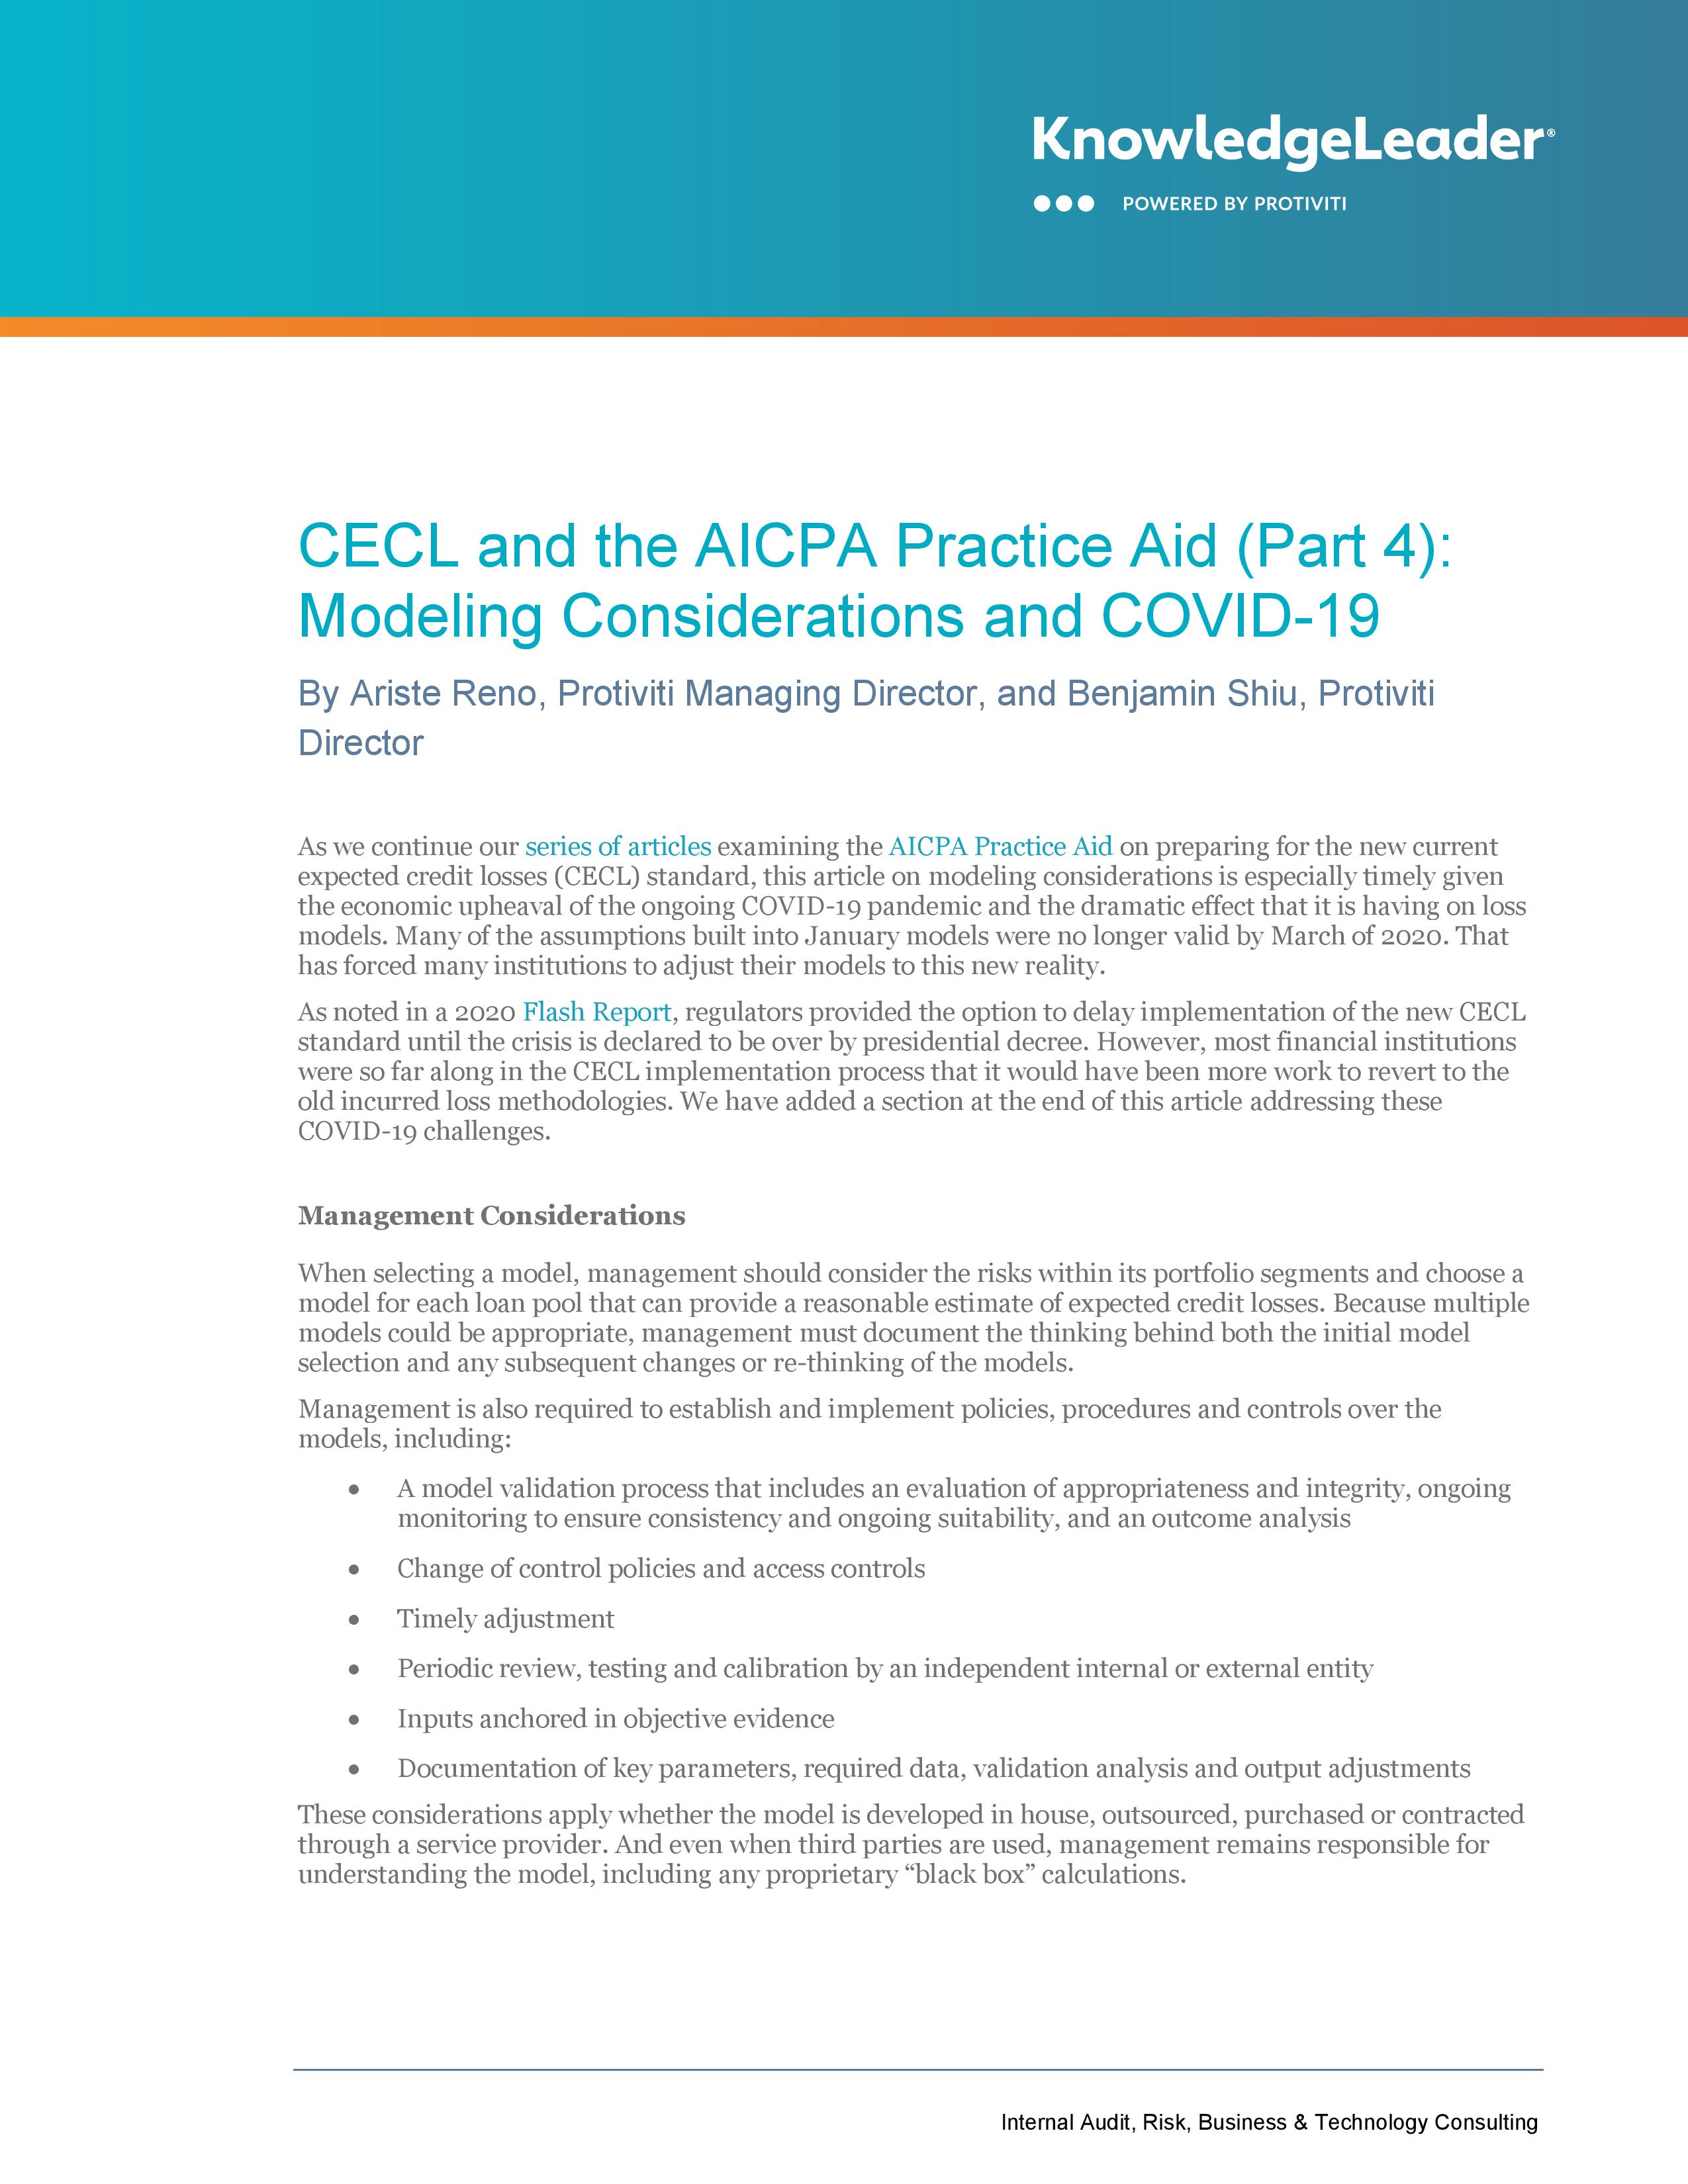 Screenshot of the first page of CECL and the AICPA Practice Aid (Part 4) Modeling Considerations and COVID-19